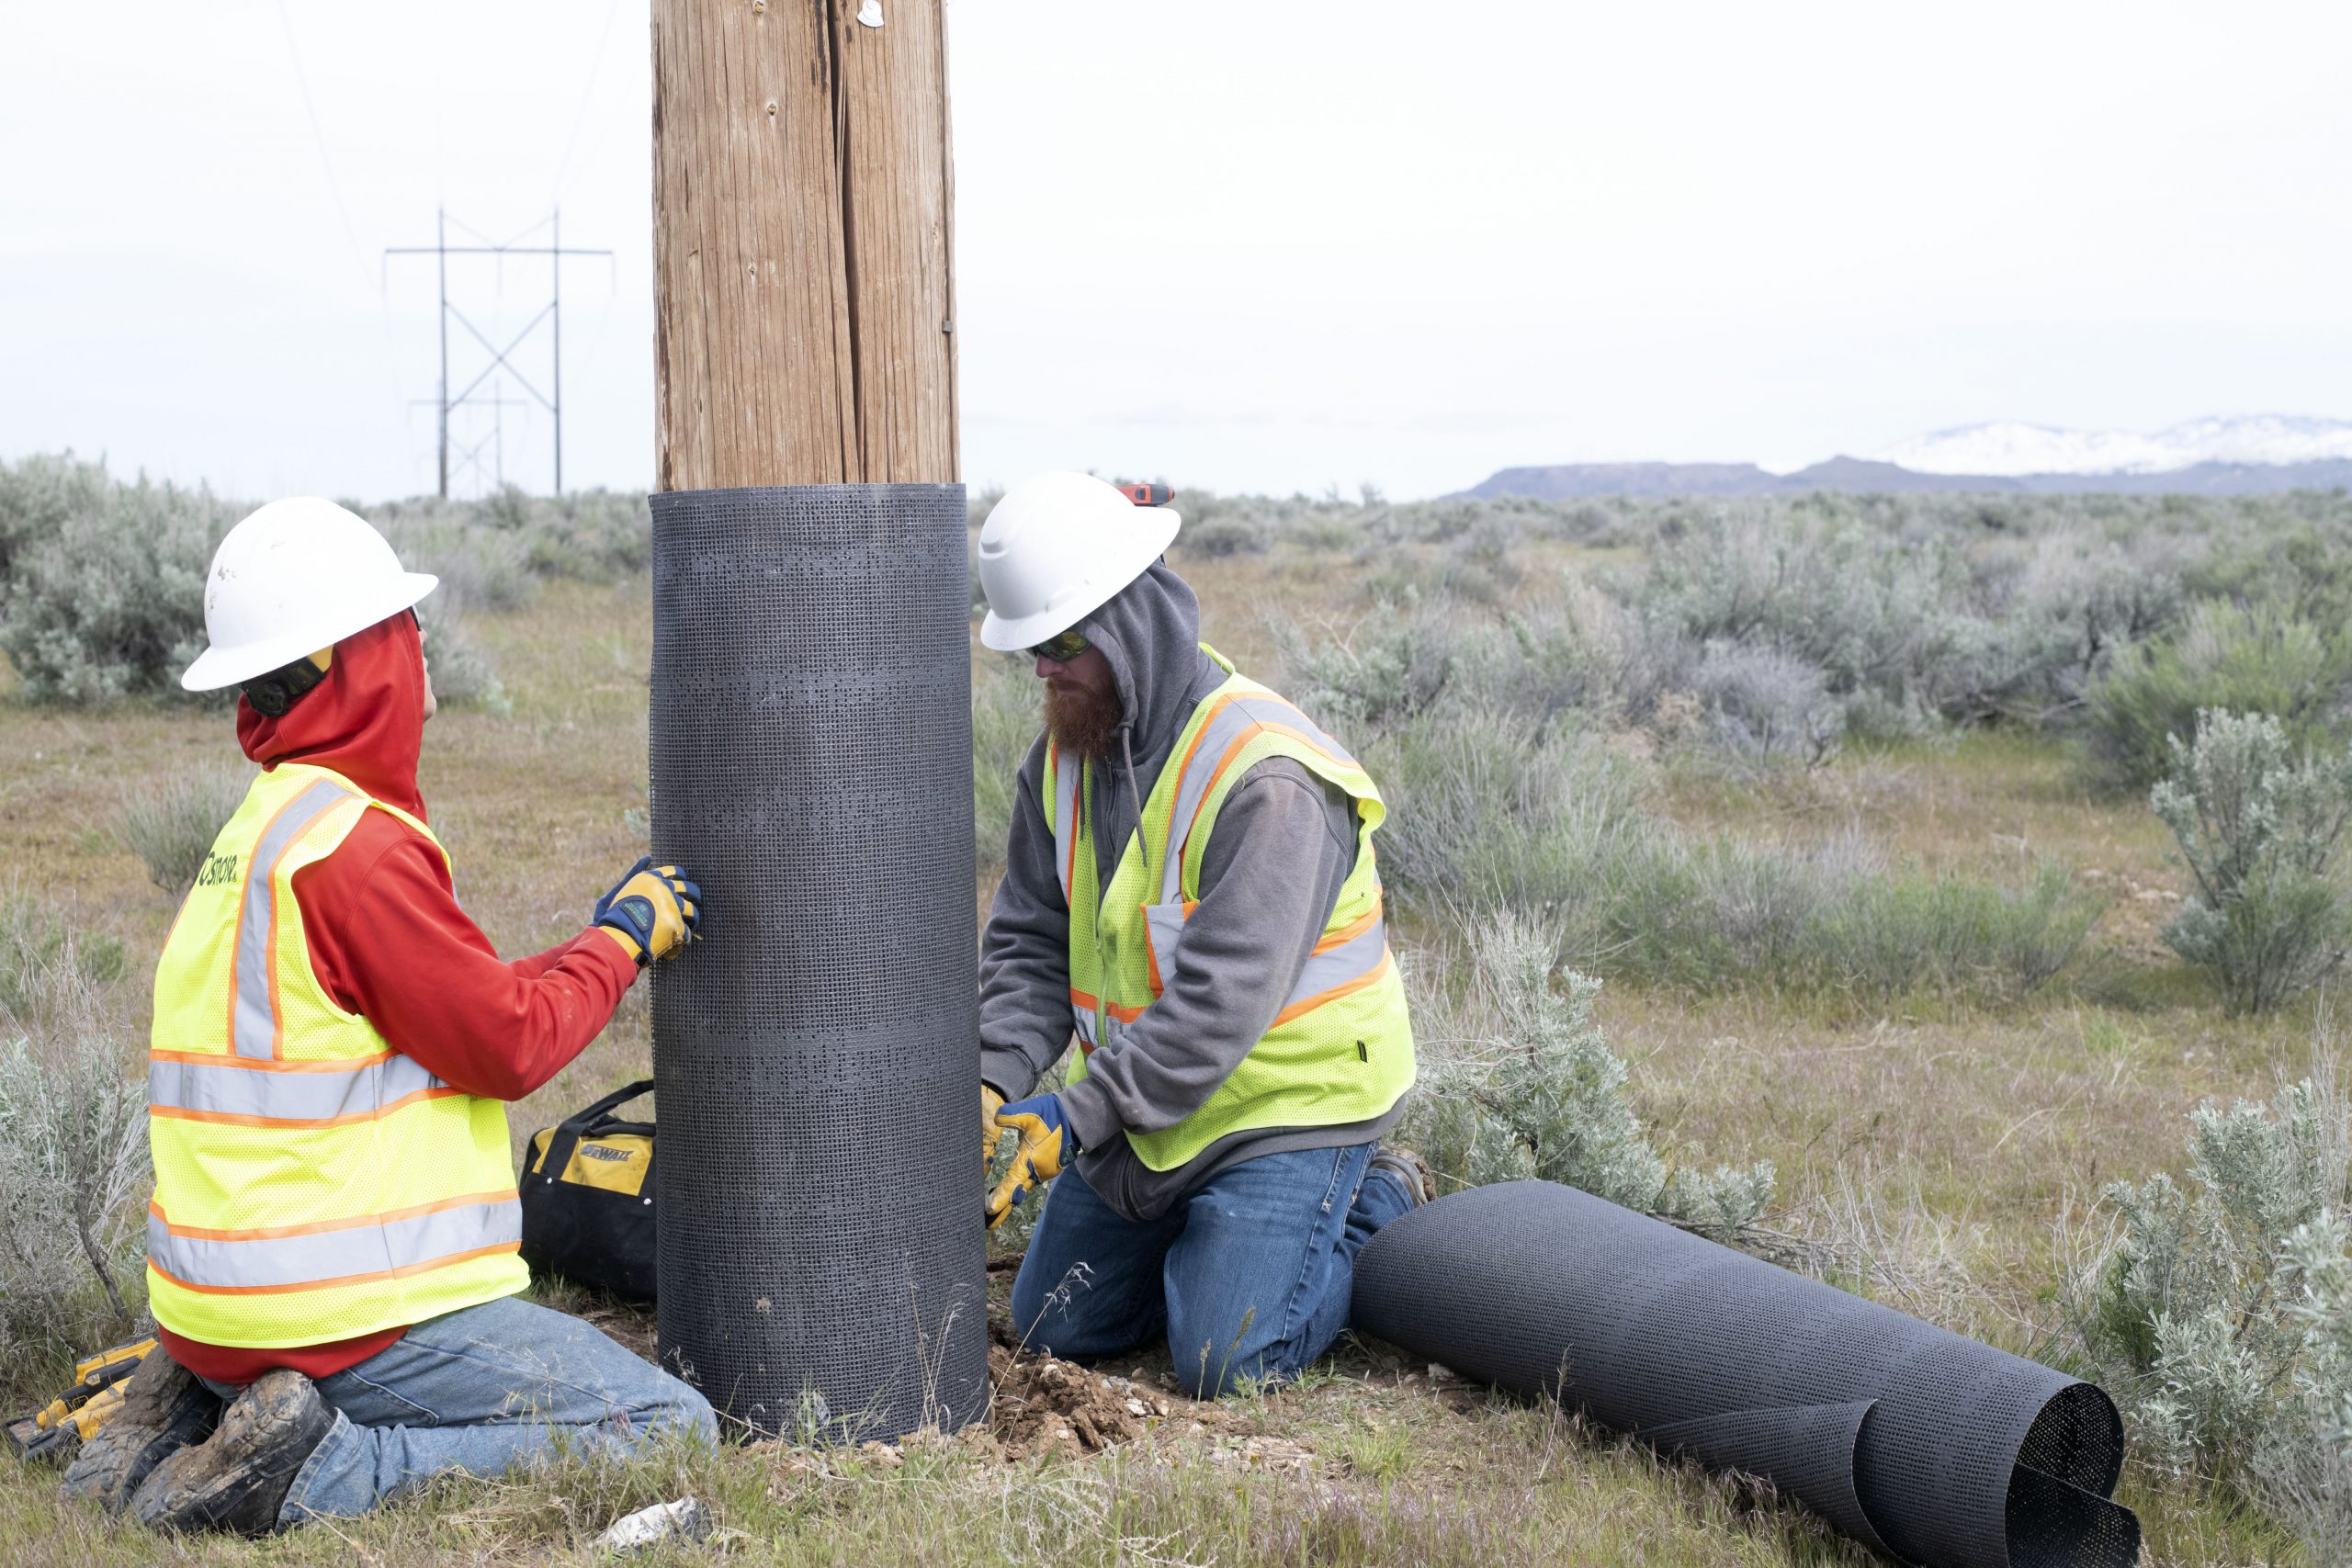 Two men wrap a wood power pole with fire resistant mesh in a sage-brush desert landscape.